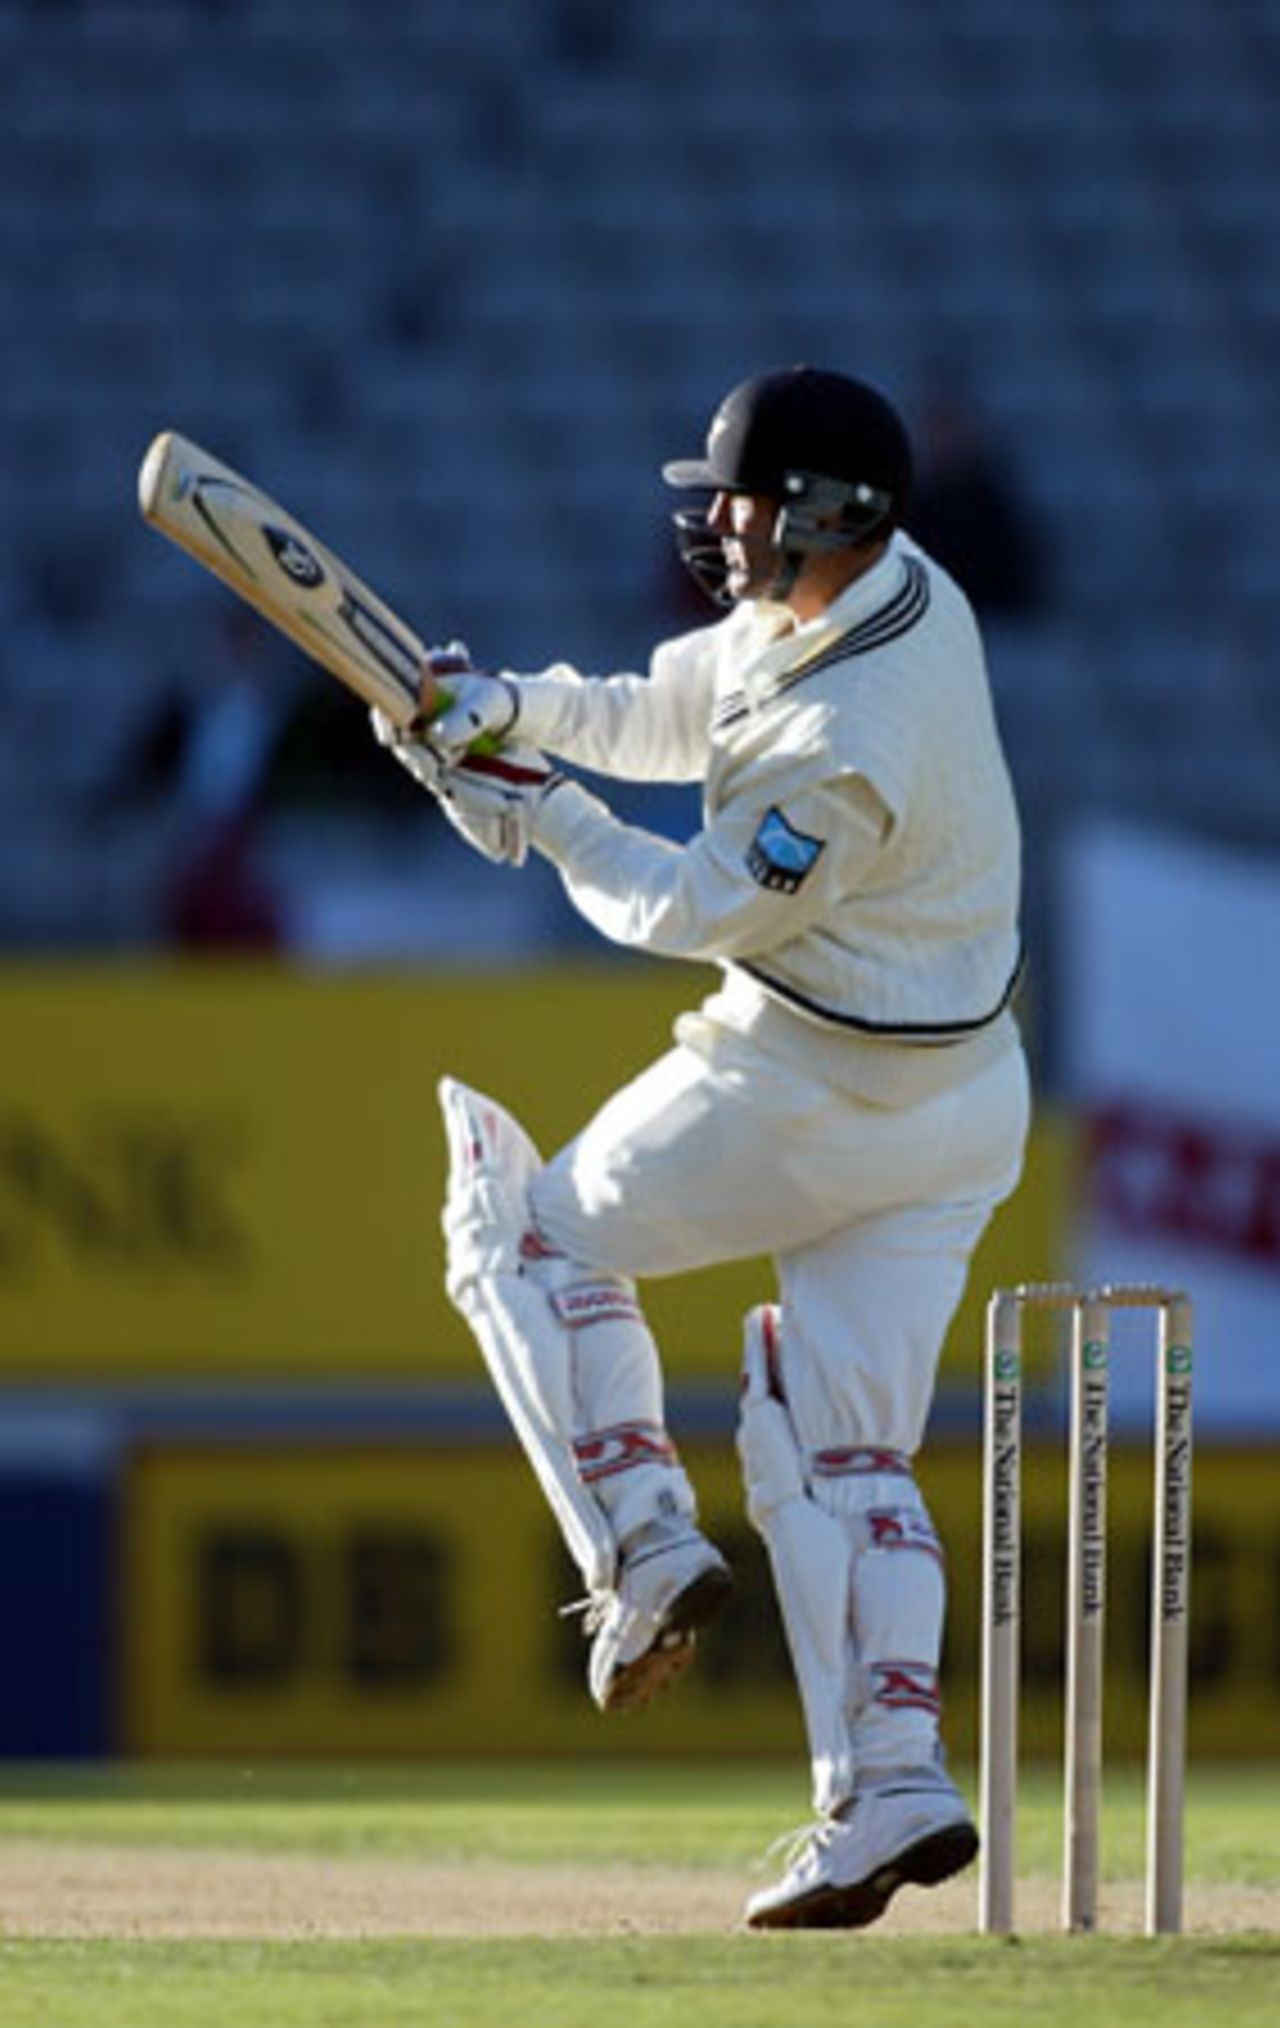 New Zealand batsman Nathan Astle pulls a delivery during his second innings of 65. 3rd Test: New Zealand v England at Eden Park, Auckland, 30 March-3 April 2002 (2 April 2002).